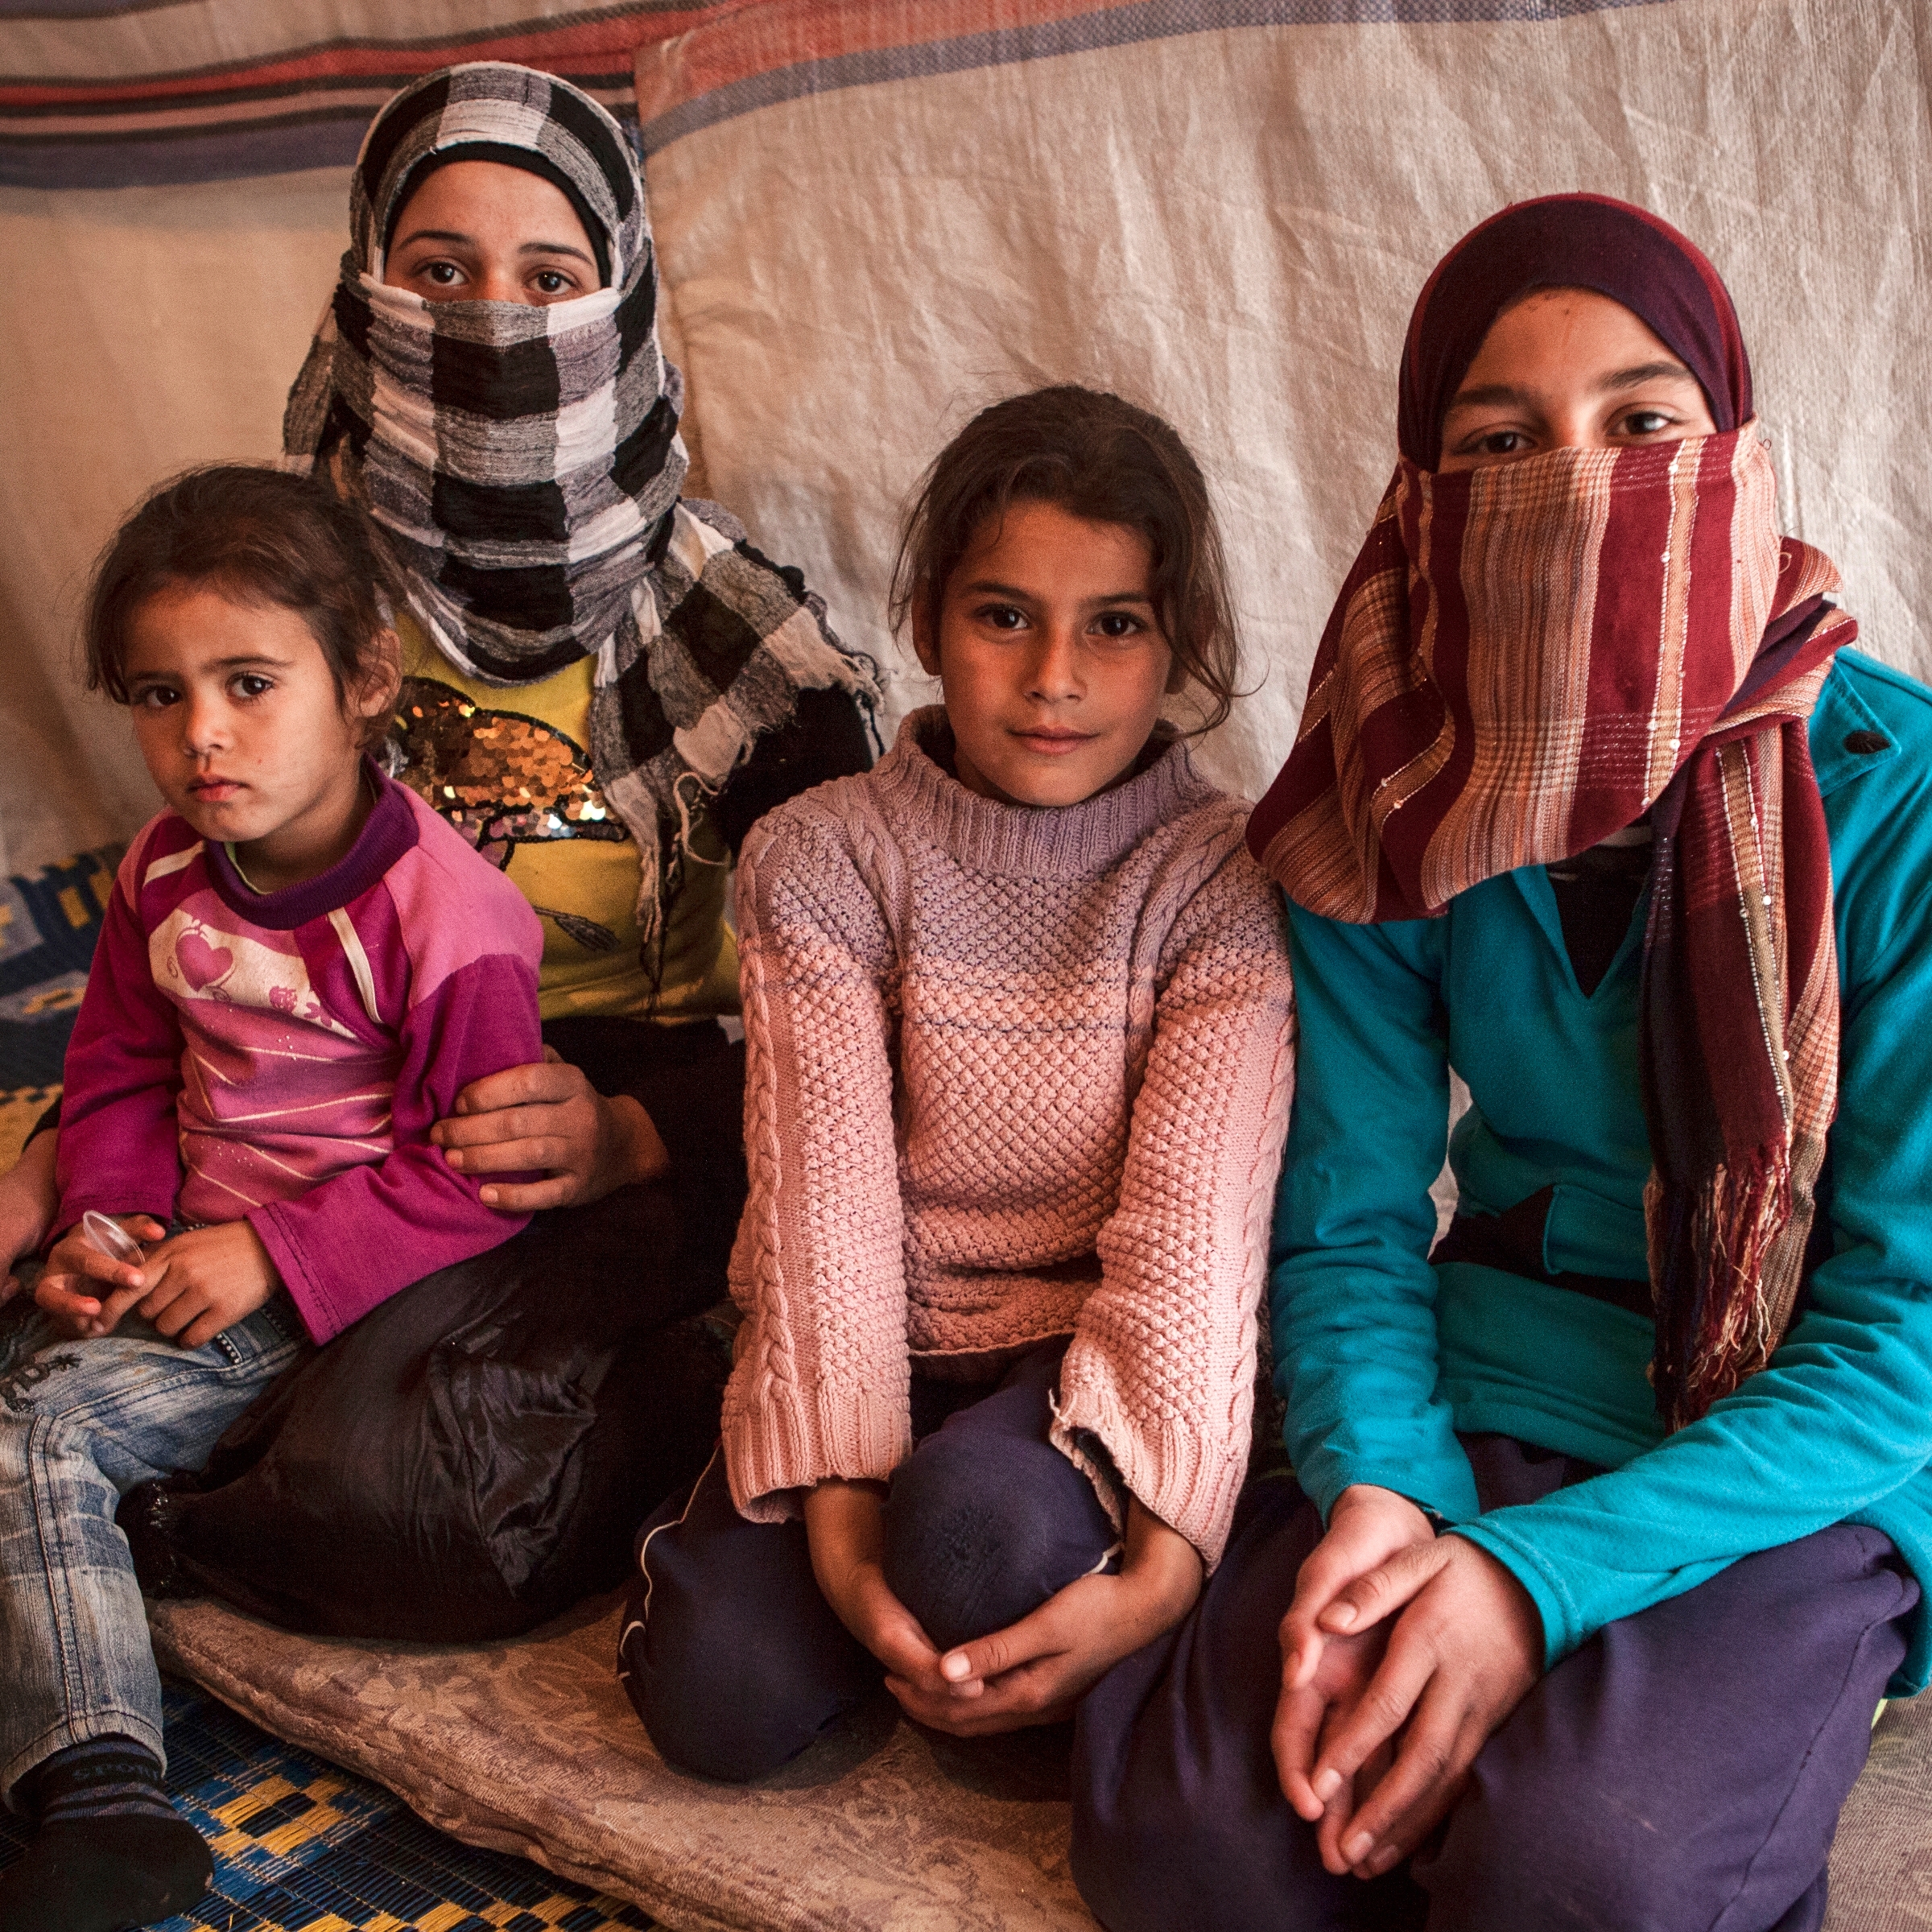 Sana* and her sisters at a refugee settlement near the Syrian border. Save the Children is helping children recover from their experiences within Syria and across the region, to make sure they can access education and to ensure that families have the basic necessities they need to survive – including healthcare, warm clothes, nutritious food and winter shelter materials. Photo Credit: Save the Children 2013.